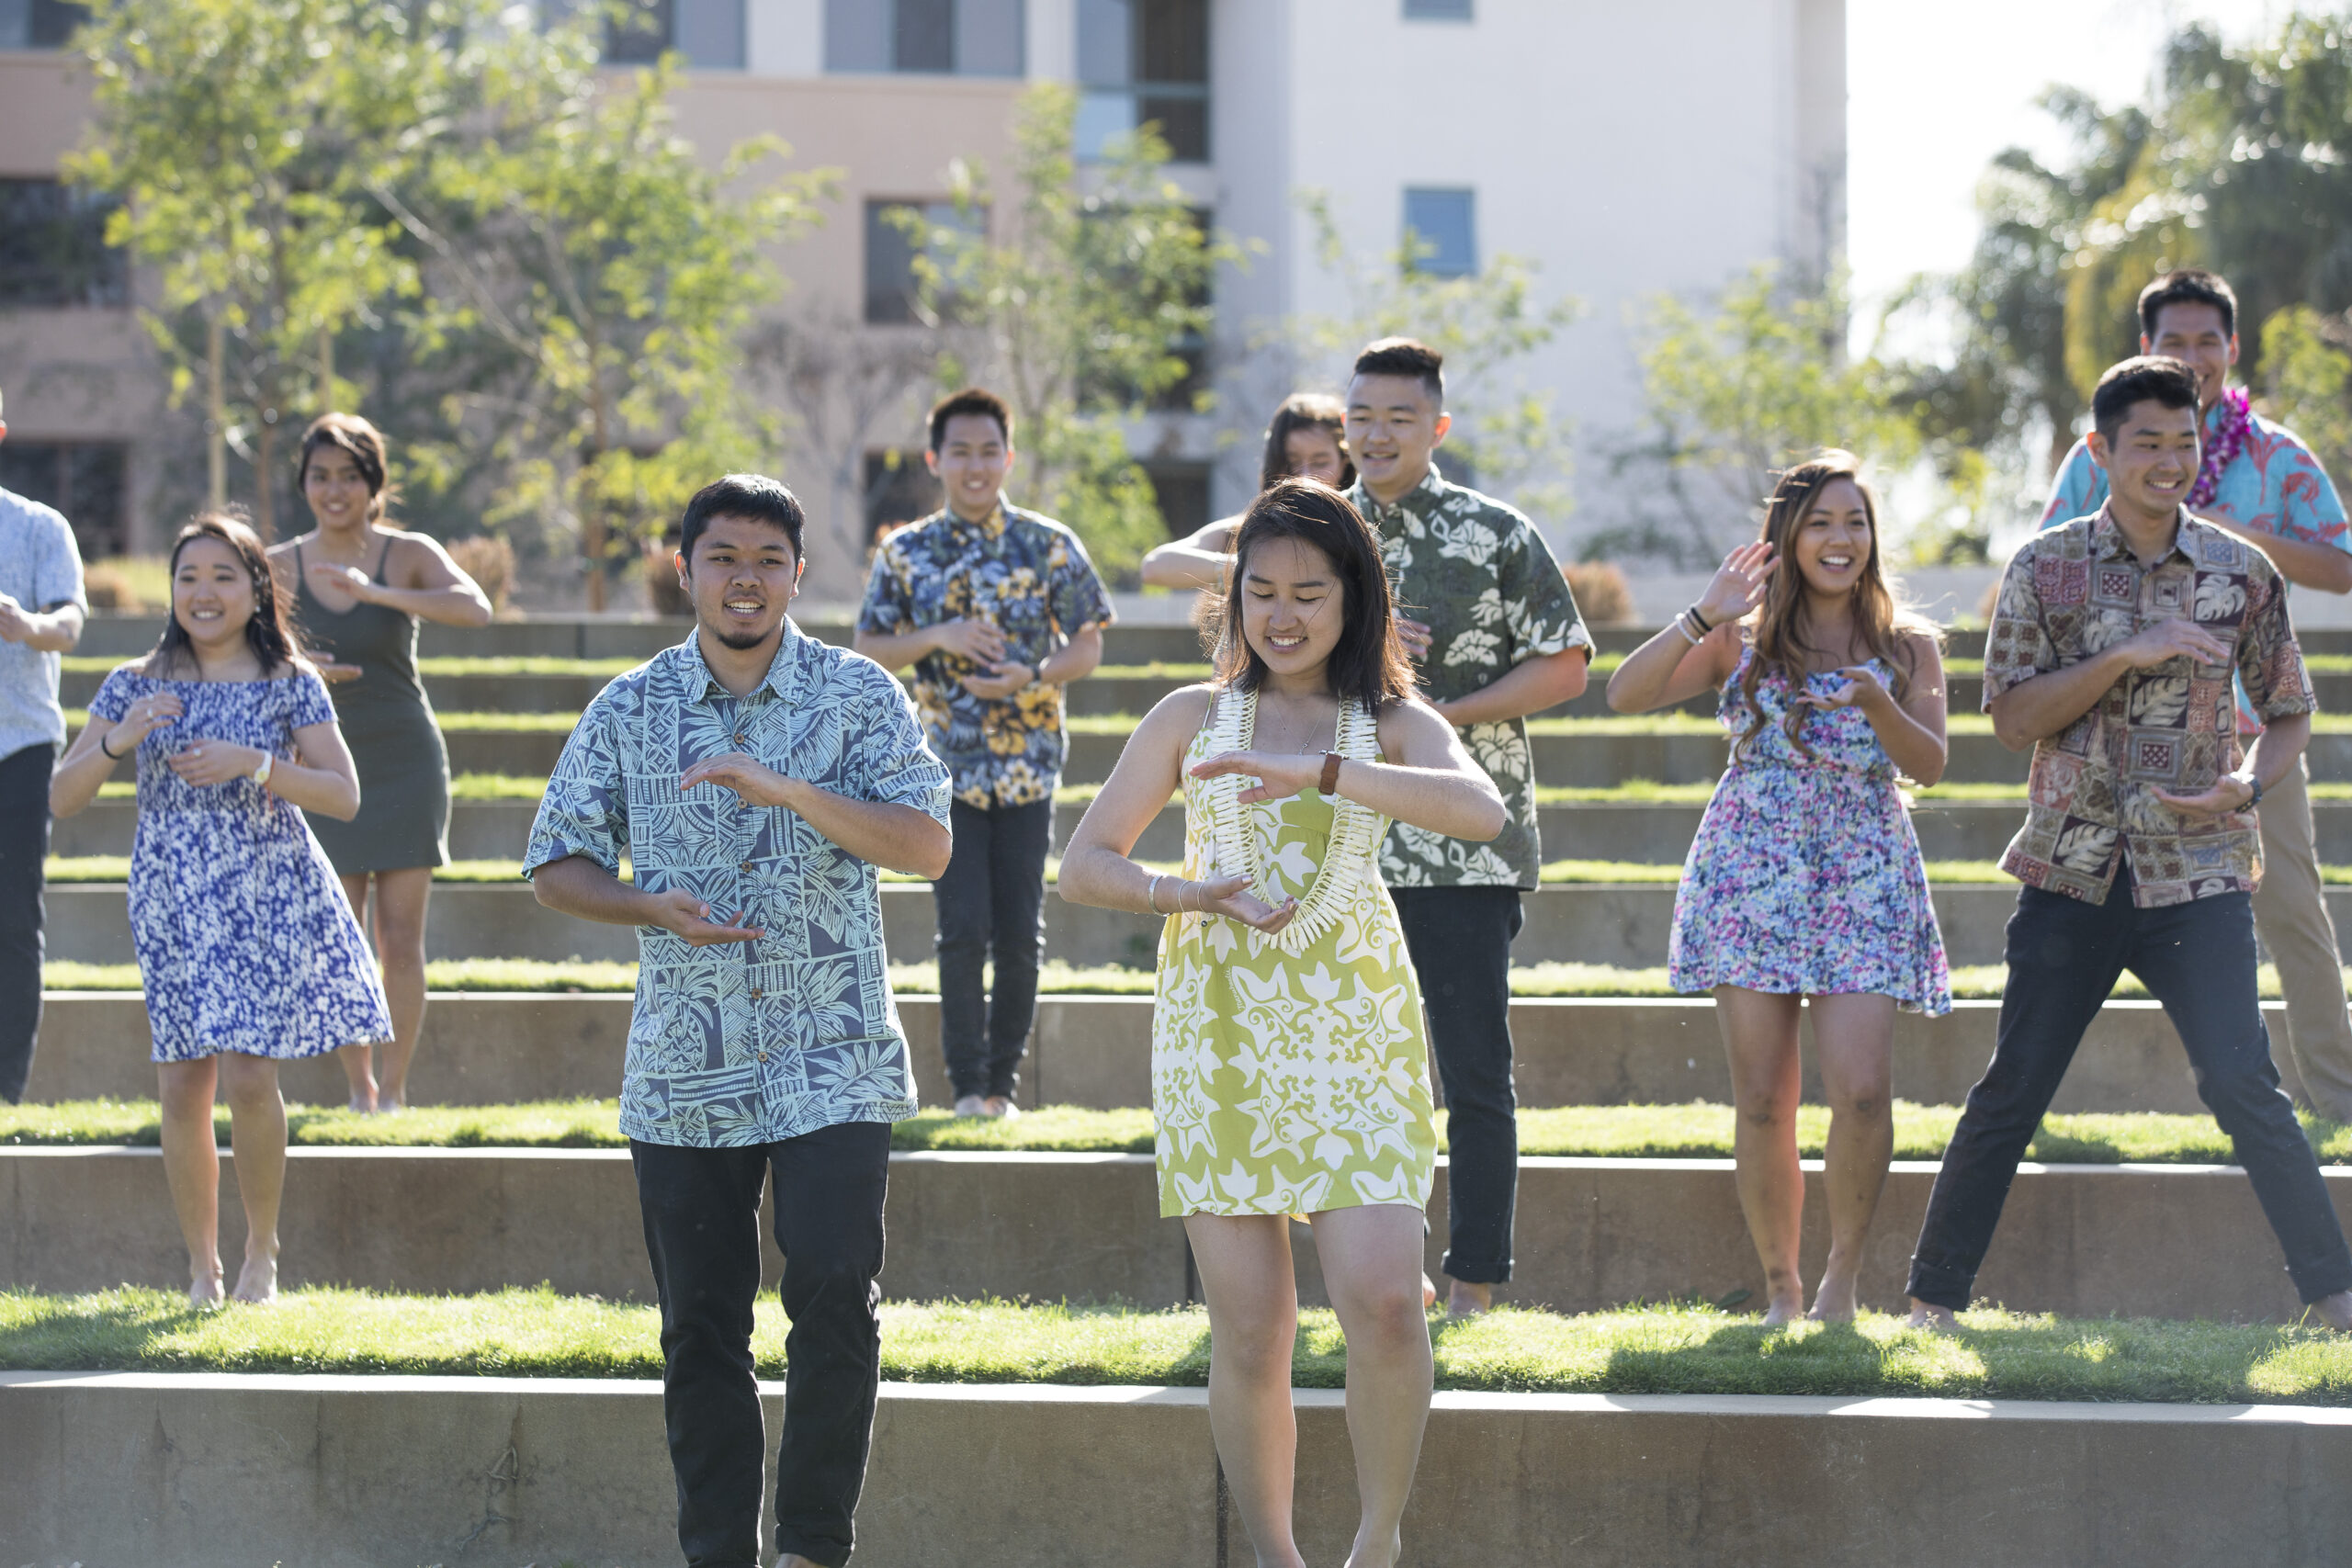 Students stand on green grassy steps wearing blue and yellow Hawaiian style clothes dancing Hula.